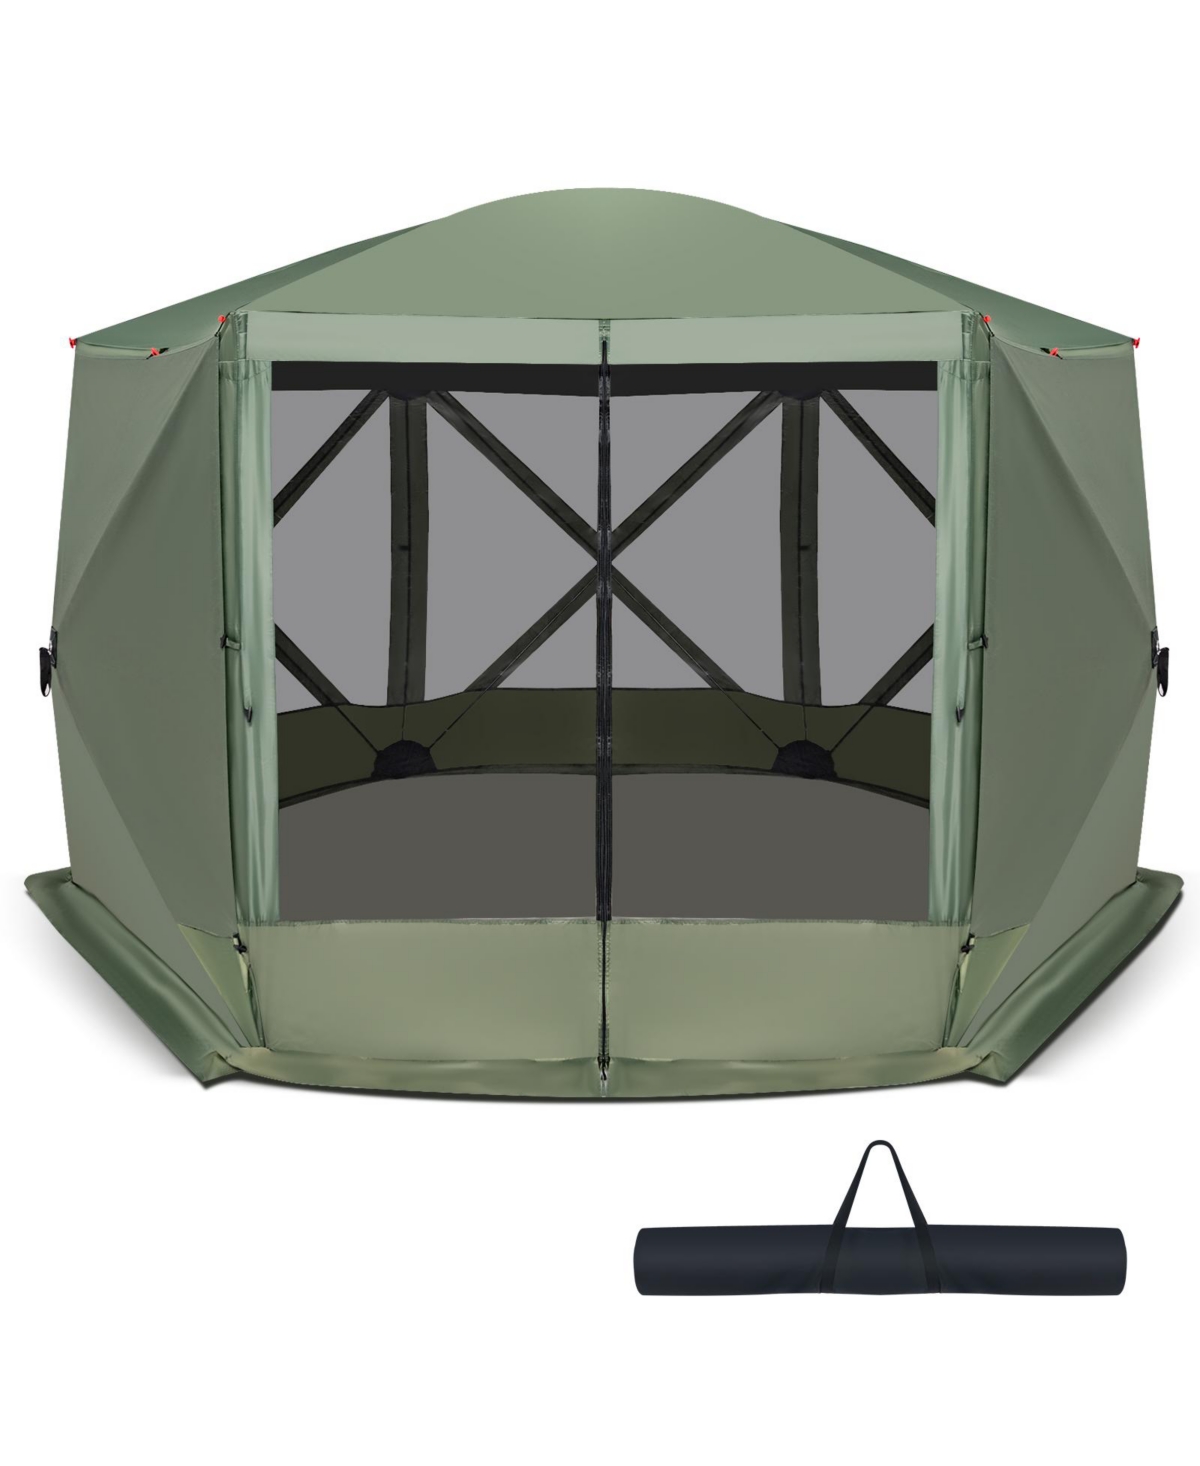 1.5 X 11.5 Ft 6-Sided Pop-up Screen House Tent With 2 Wind Panels for Camping - Green